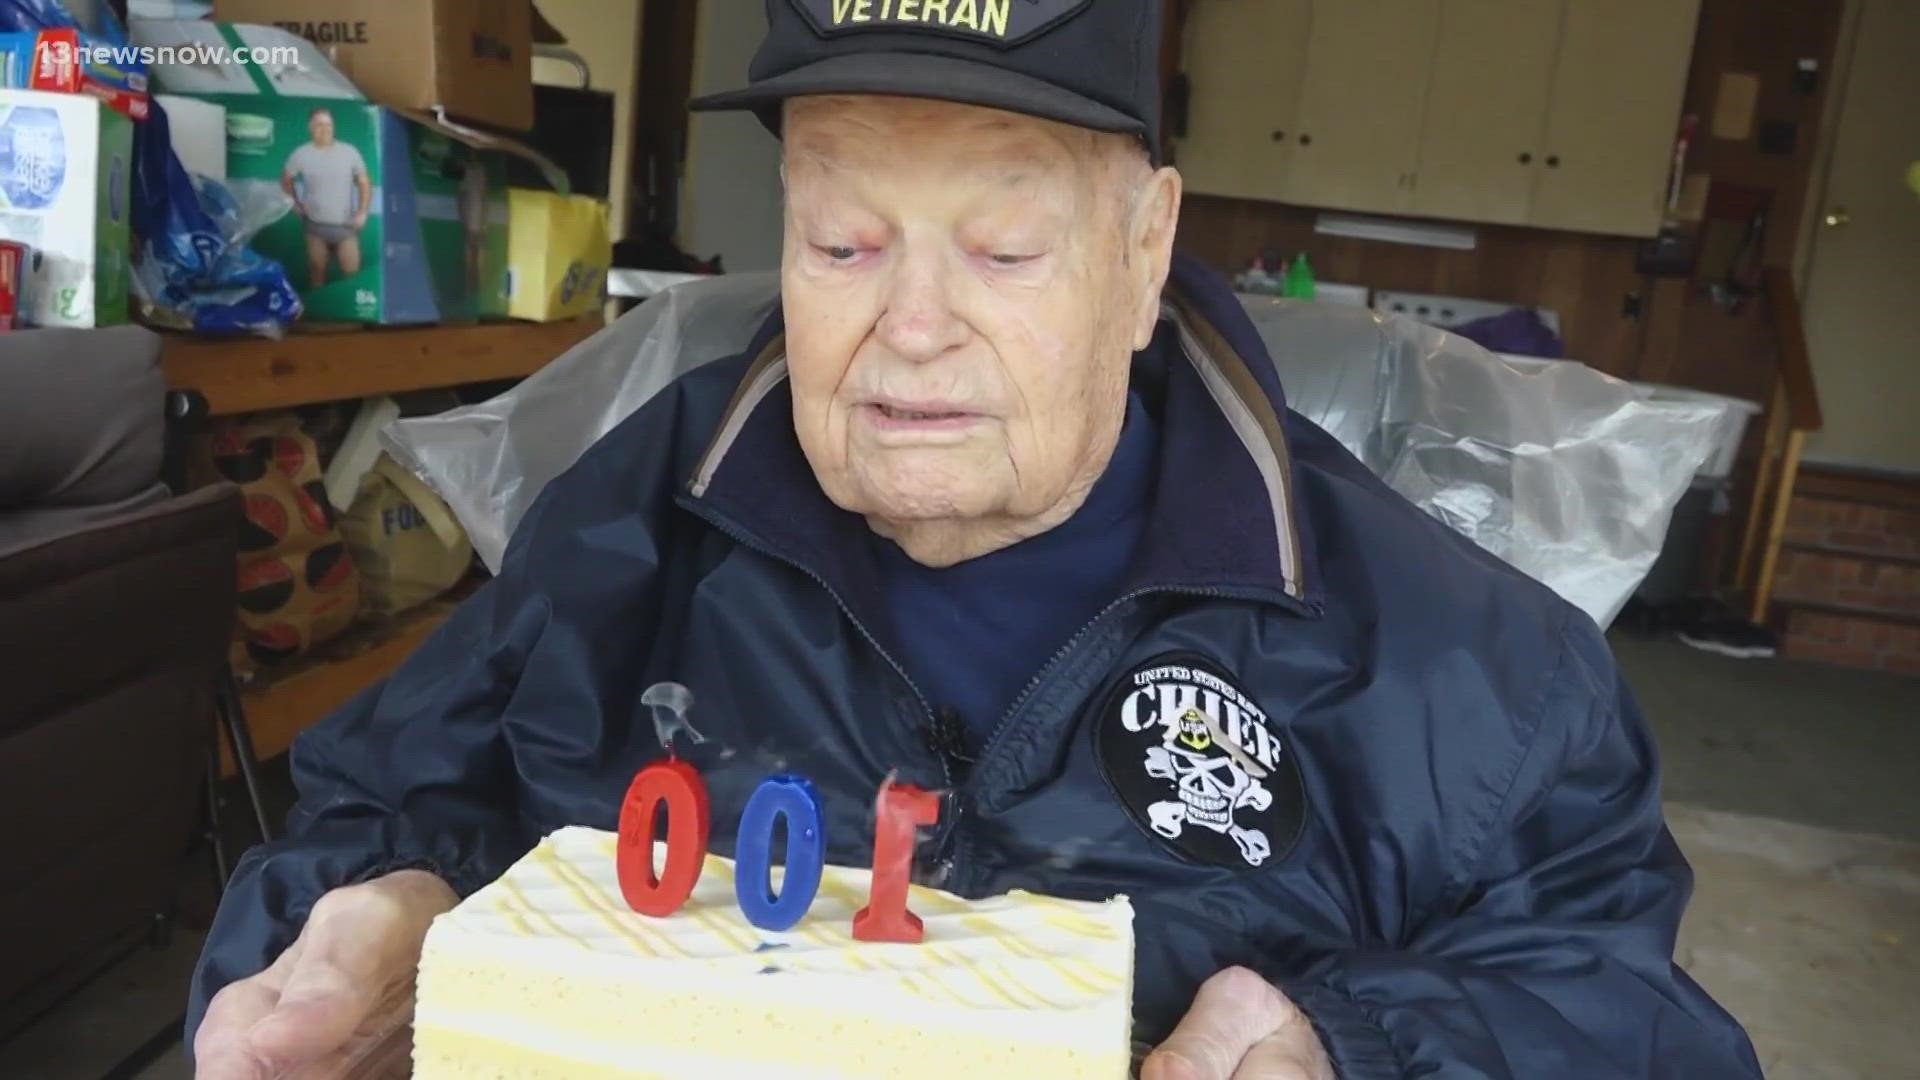 100-year-old USCG WWII vet Bob Manges helped transport U.S. troops to Omaha Beach, France prior to the June 6, 1944, D-Day invasion.